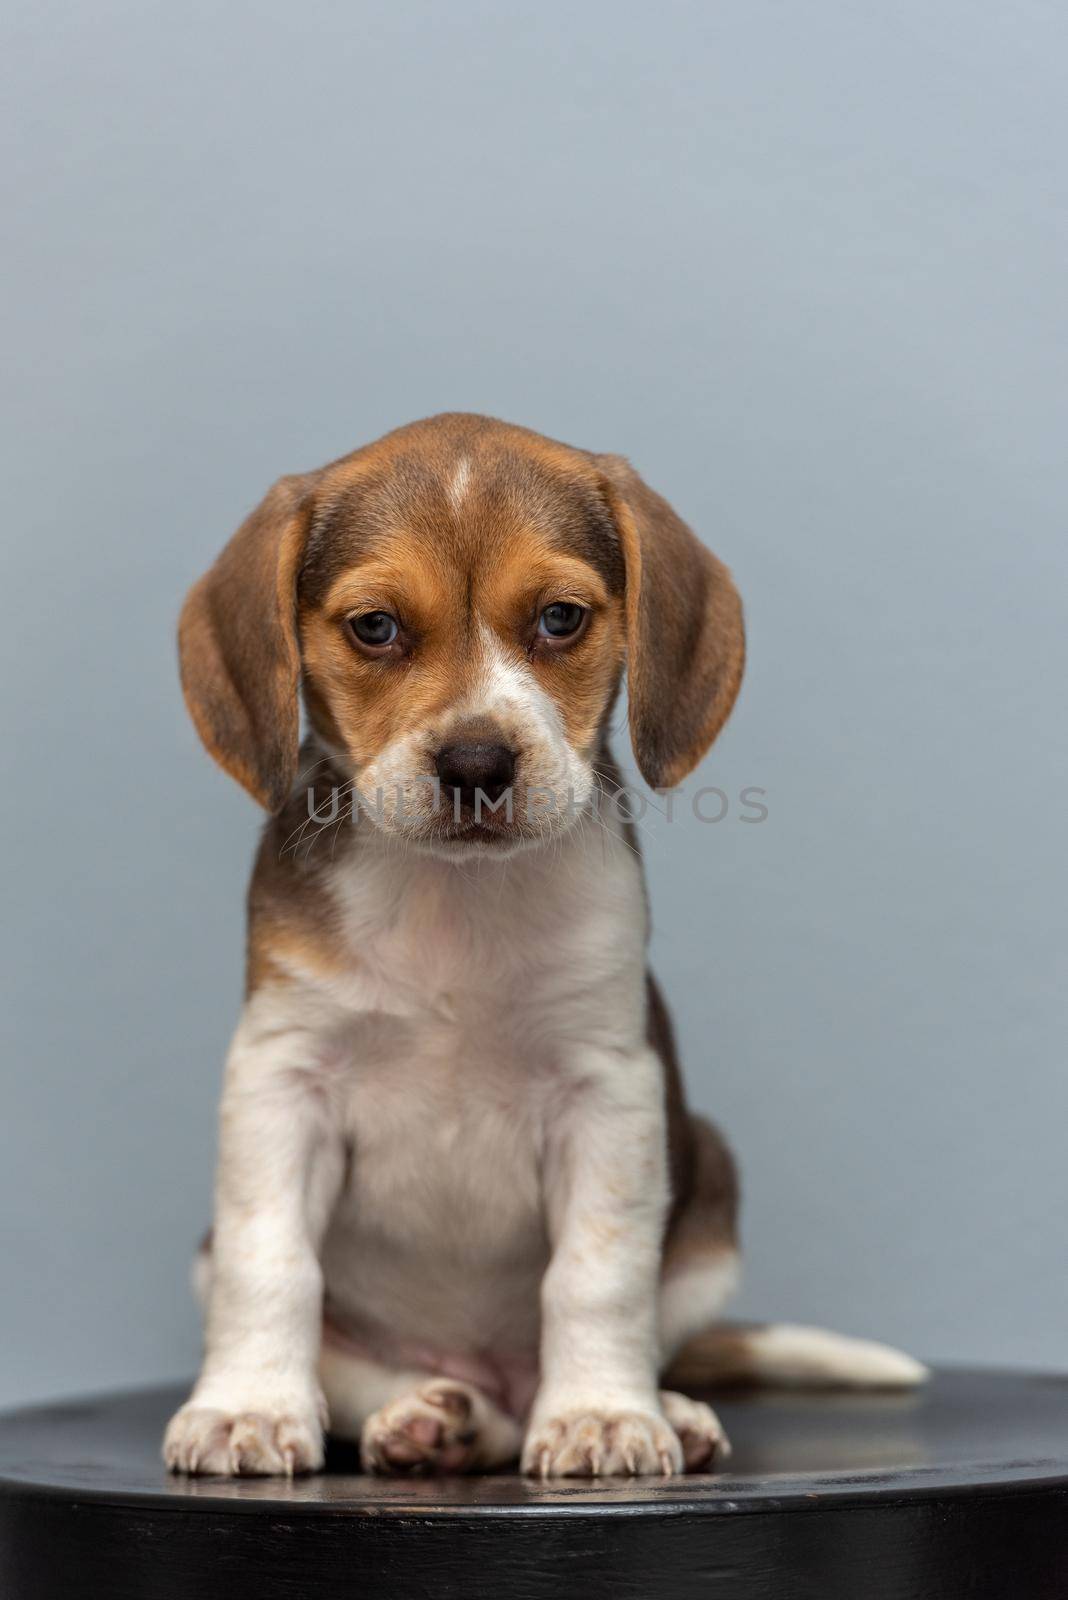 Smile adorable beagle puppy sitting by martinscphoto